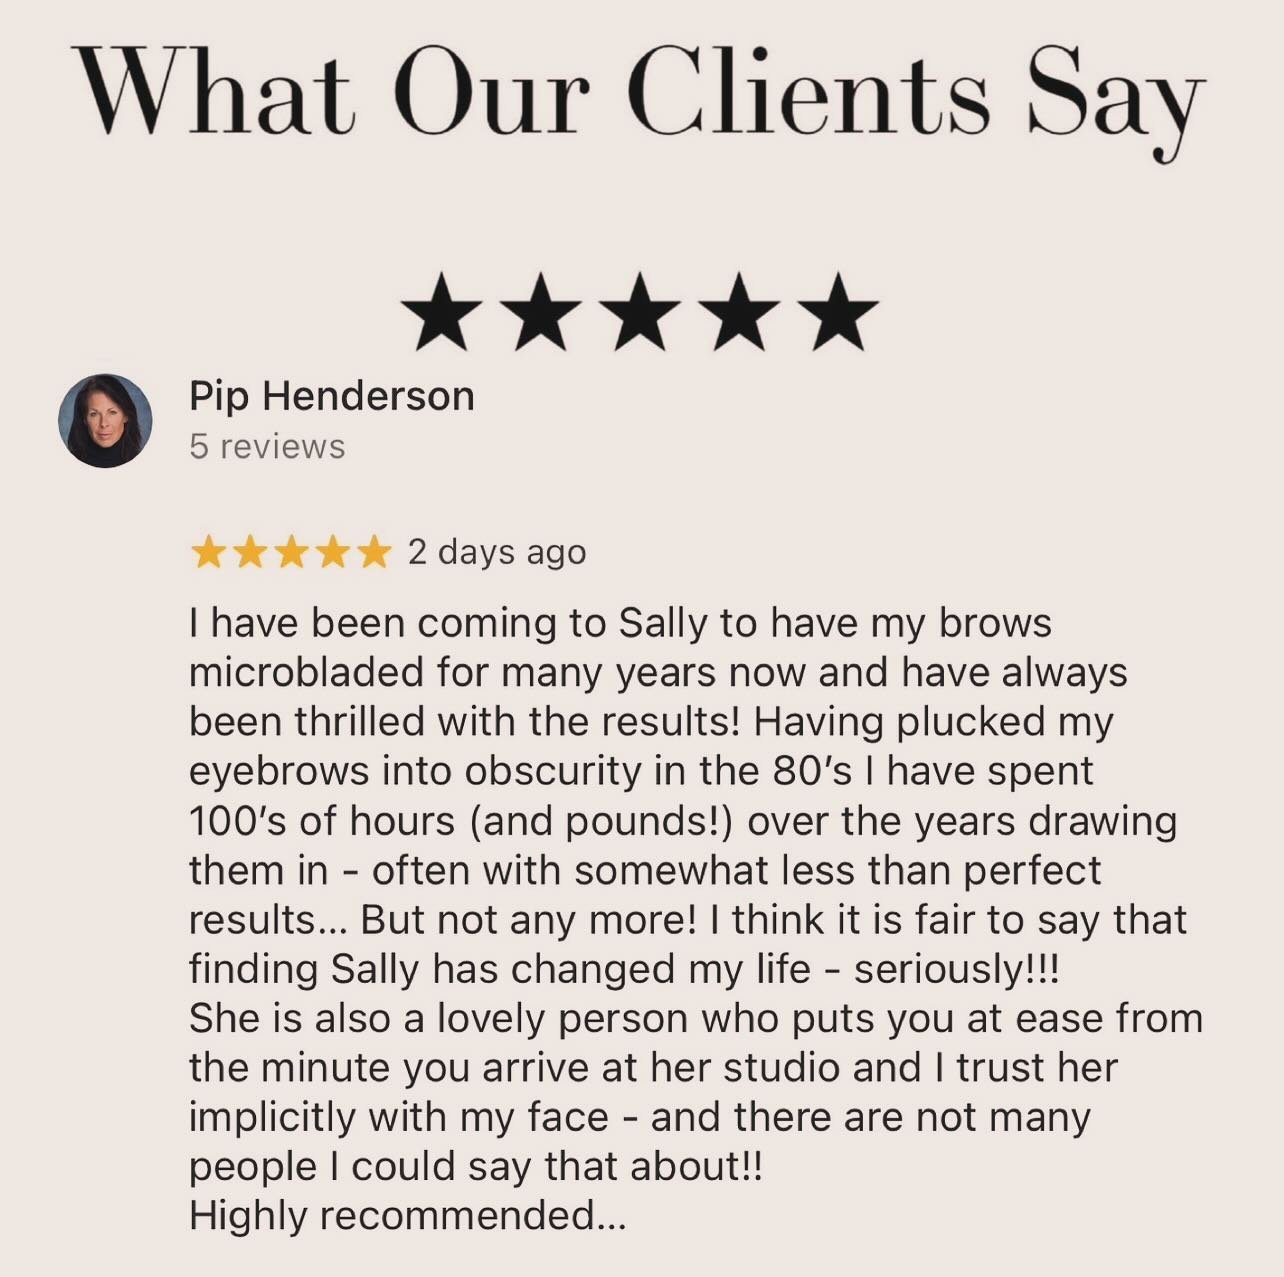 ✨ Thank you so much for your heartfelt words! 💕 It&rsquo;s been an absolute pleasure to be part of your brow journey and see the transformation unfold over the years! 🌟 Your trust means the world to me, and I&rsquo;m grateful to have such wonderful